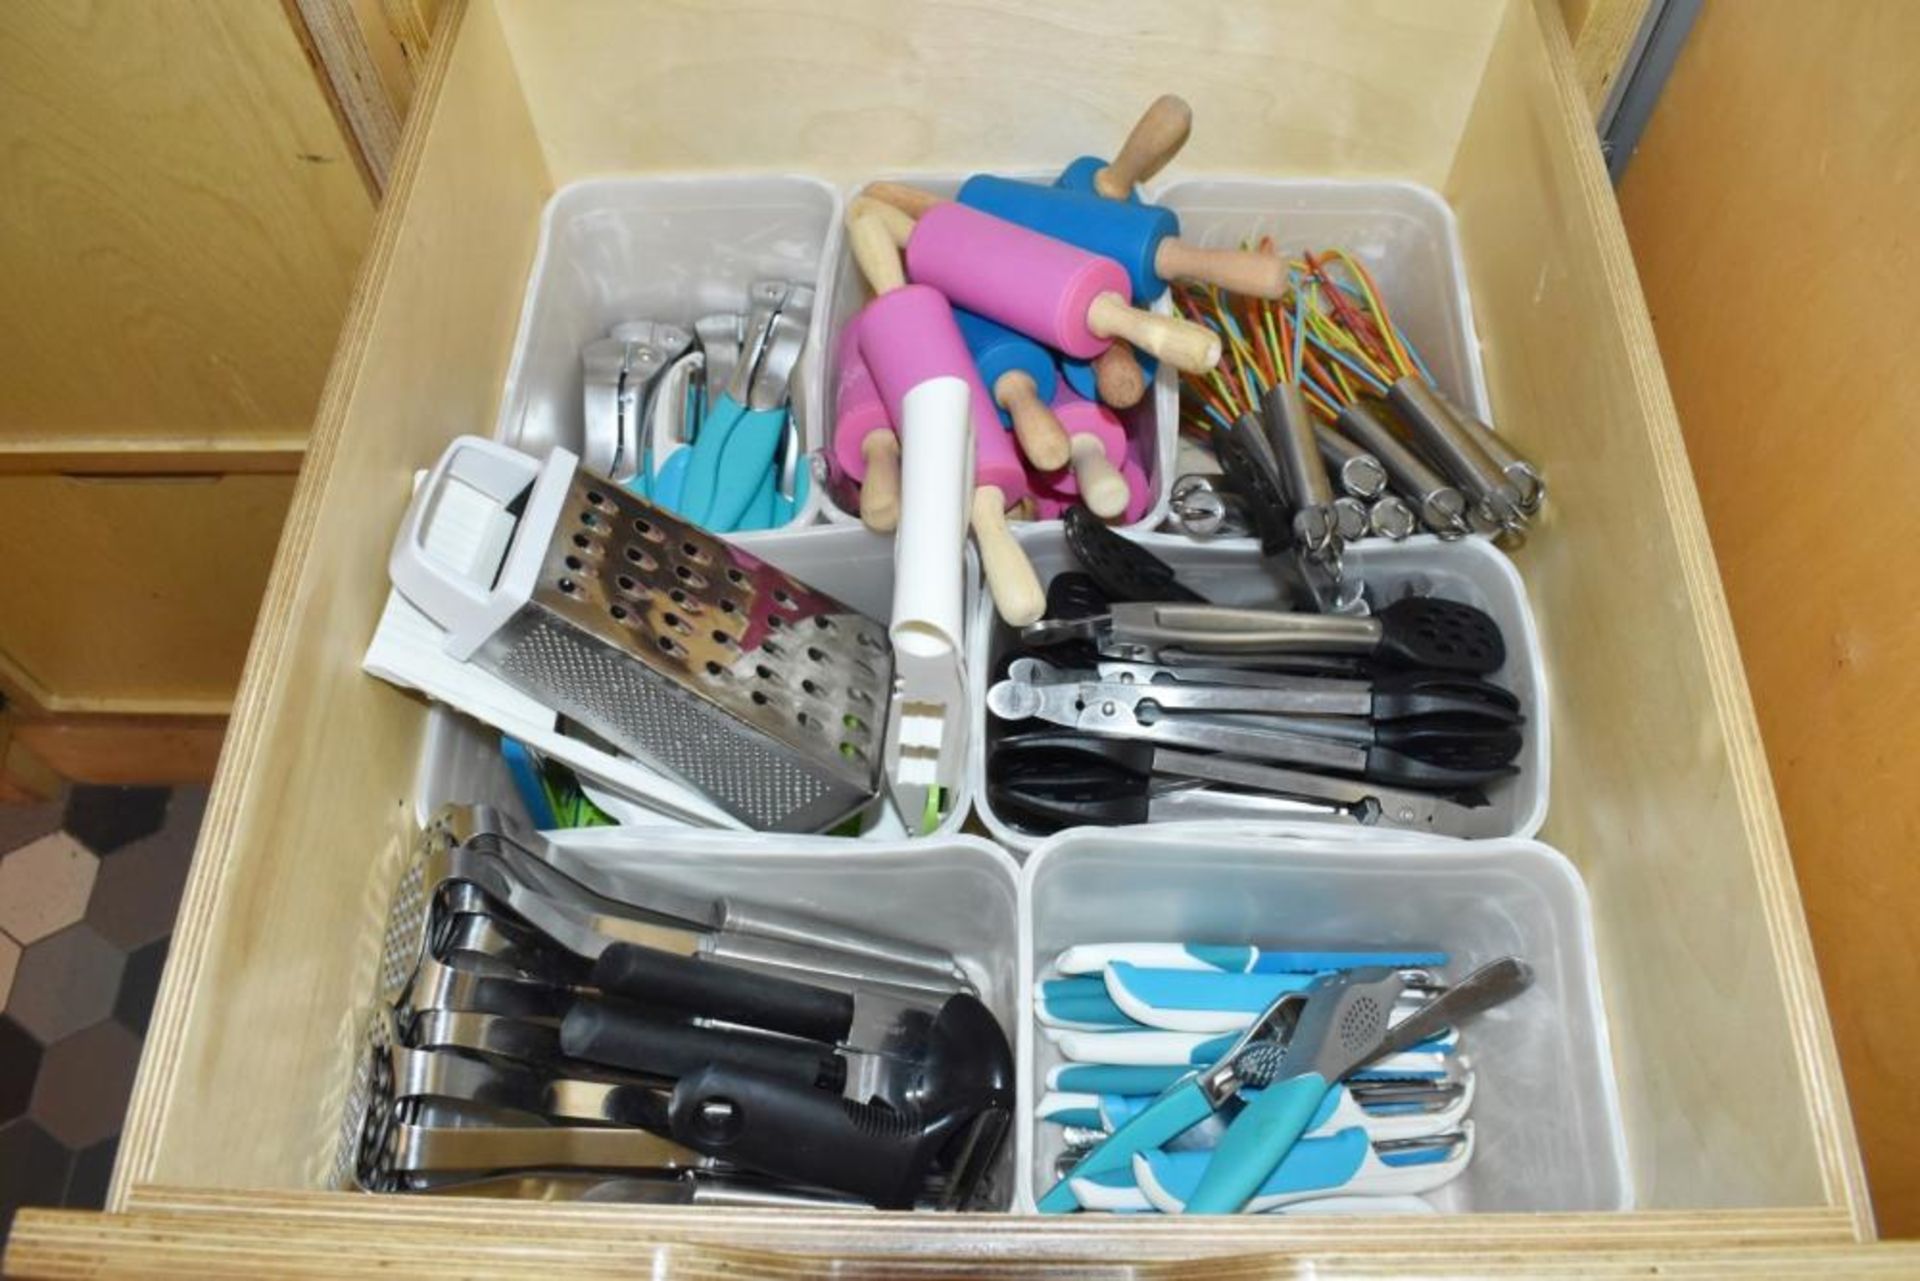 Large Selection of Kitchen Utensils and Baking Accessories - Contents of Four Large Drawers - Includ - Image 2 of 10